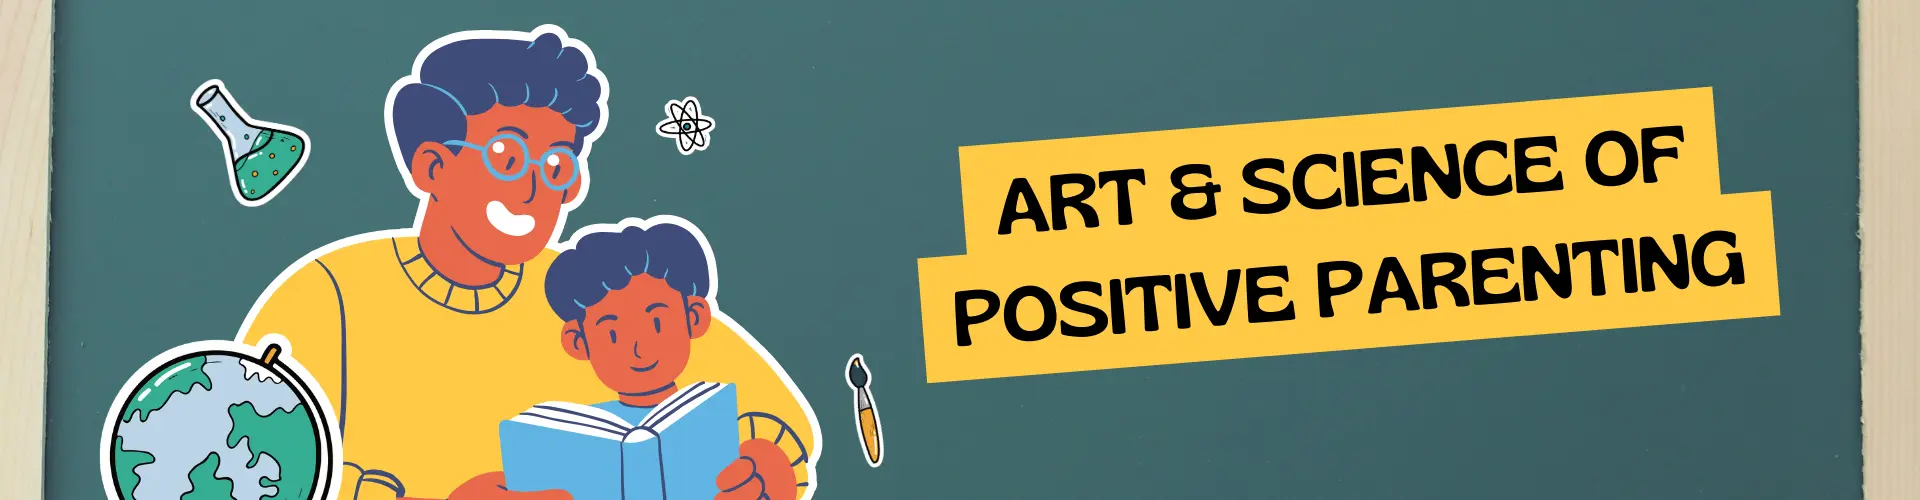 Art and Science of Positive Parenting